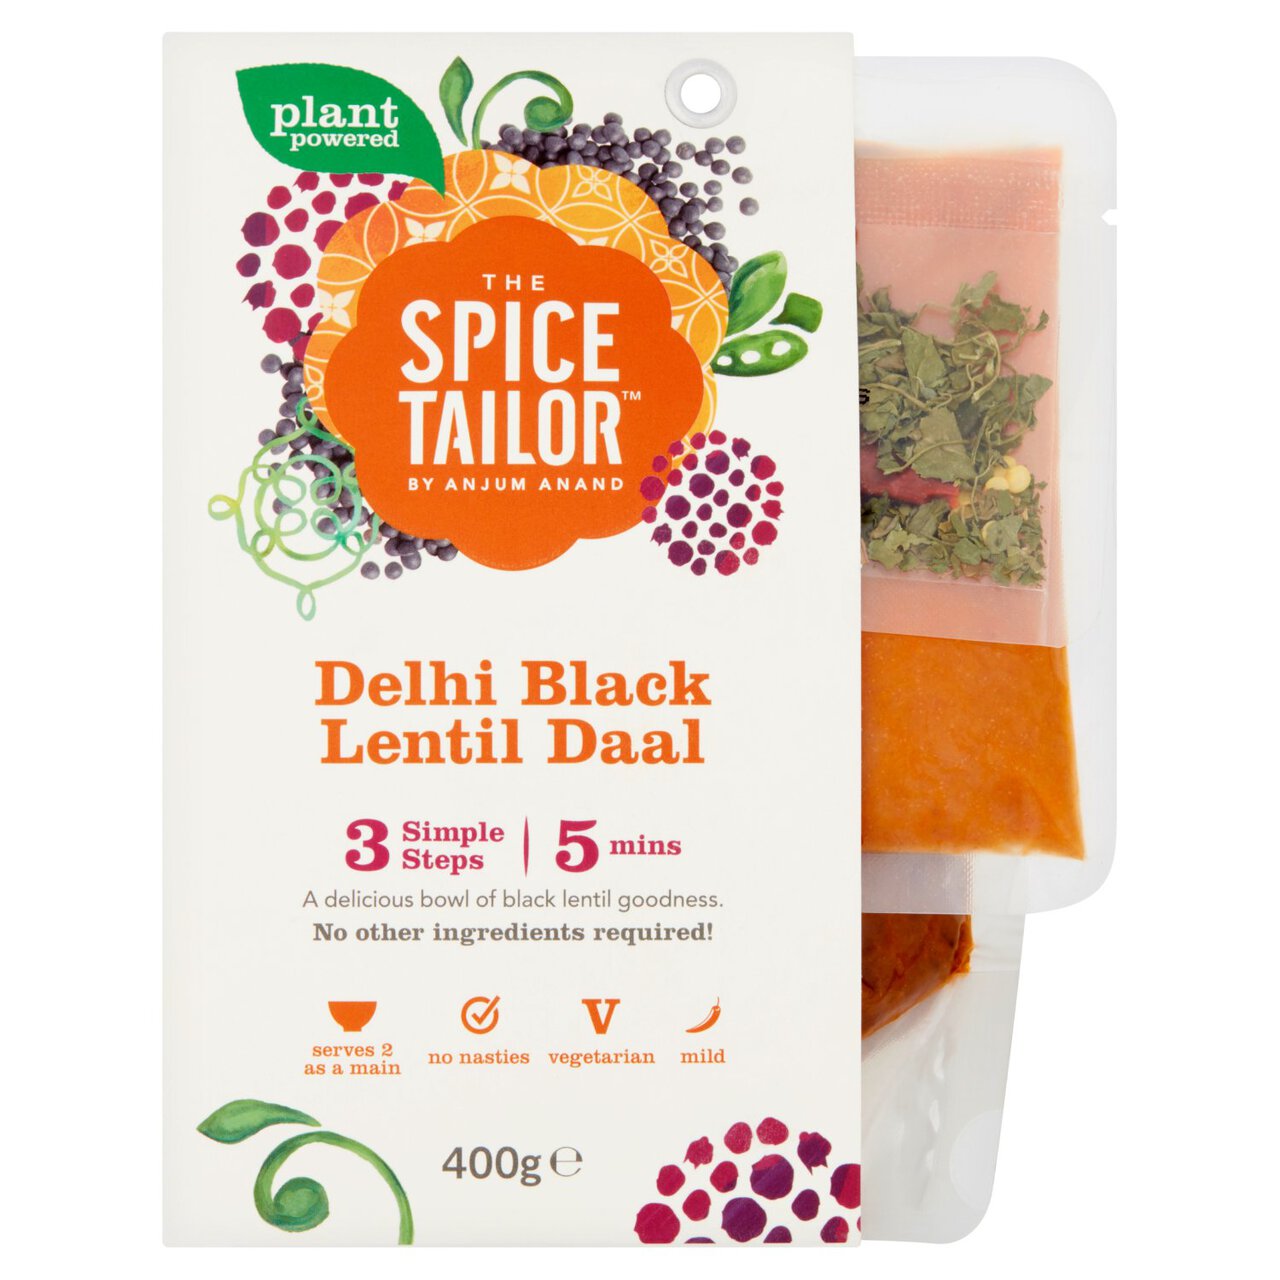 The Spice Tailor Delhi Black Makhani Daal 400g